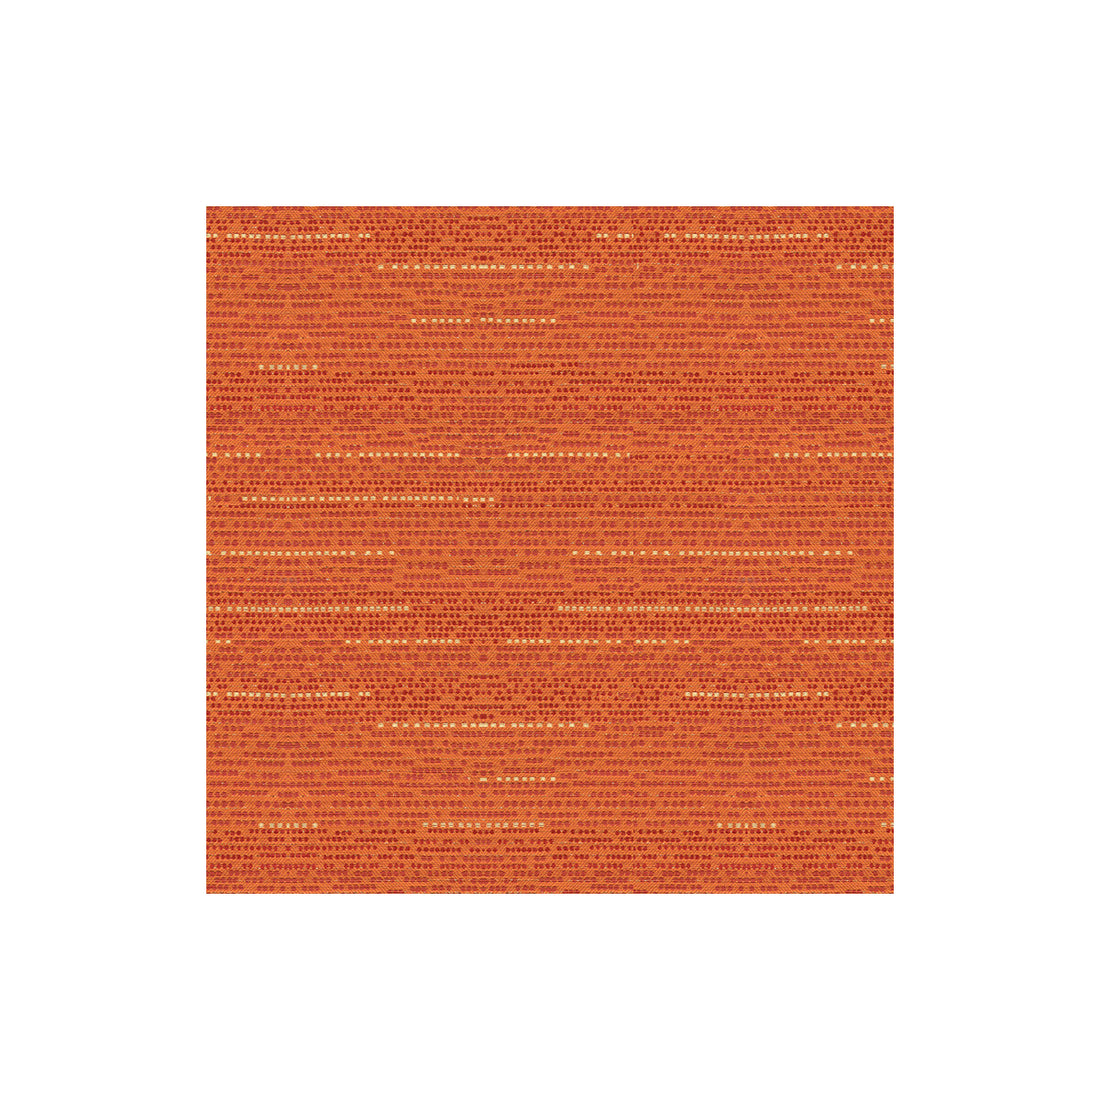 Waterline fabric in mandarin color - pattern 32934.912.0 - by Kravet Contract in the Contract Gis collection